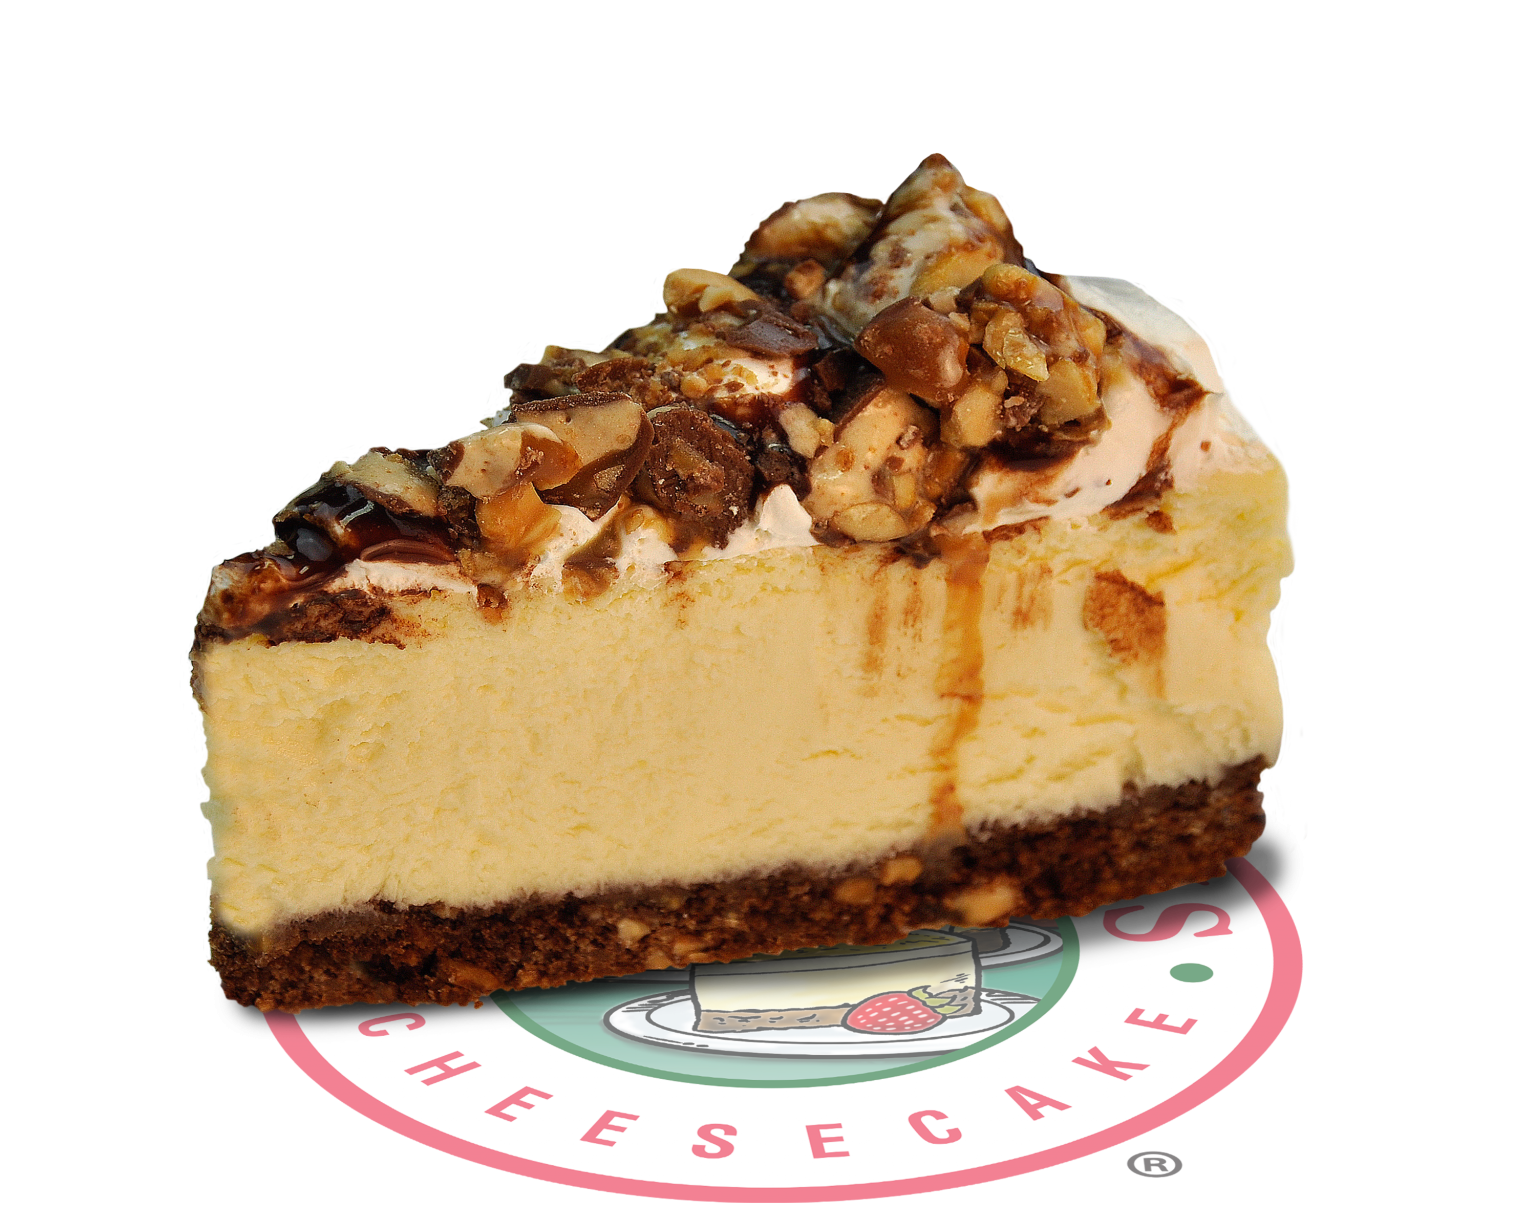 Cheesecake for Champions.